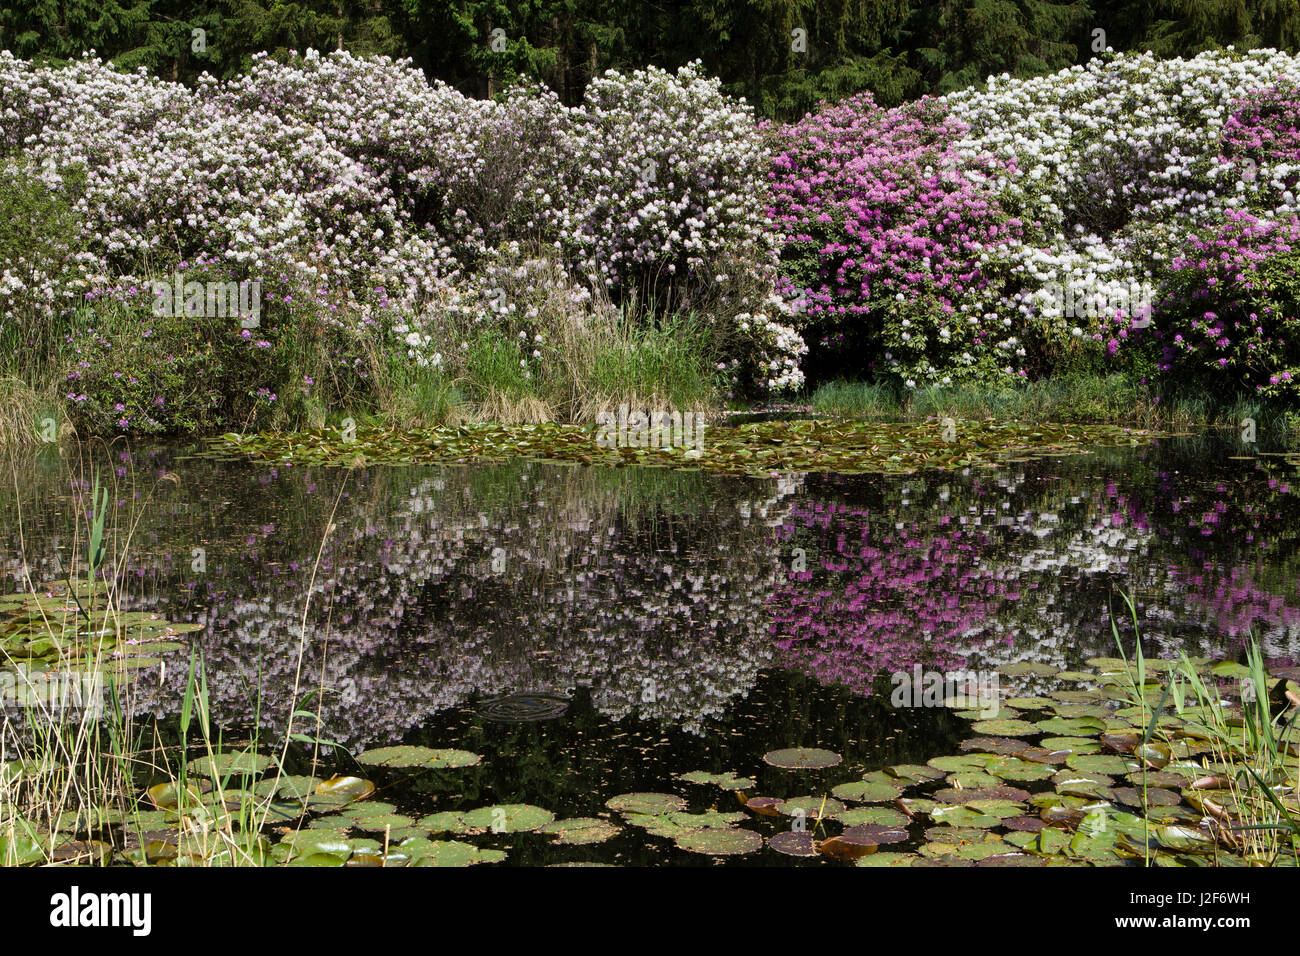 rhododendrons in bloom around a pond in the forest Stock Photo